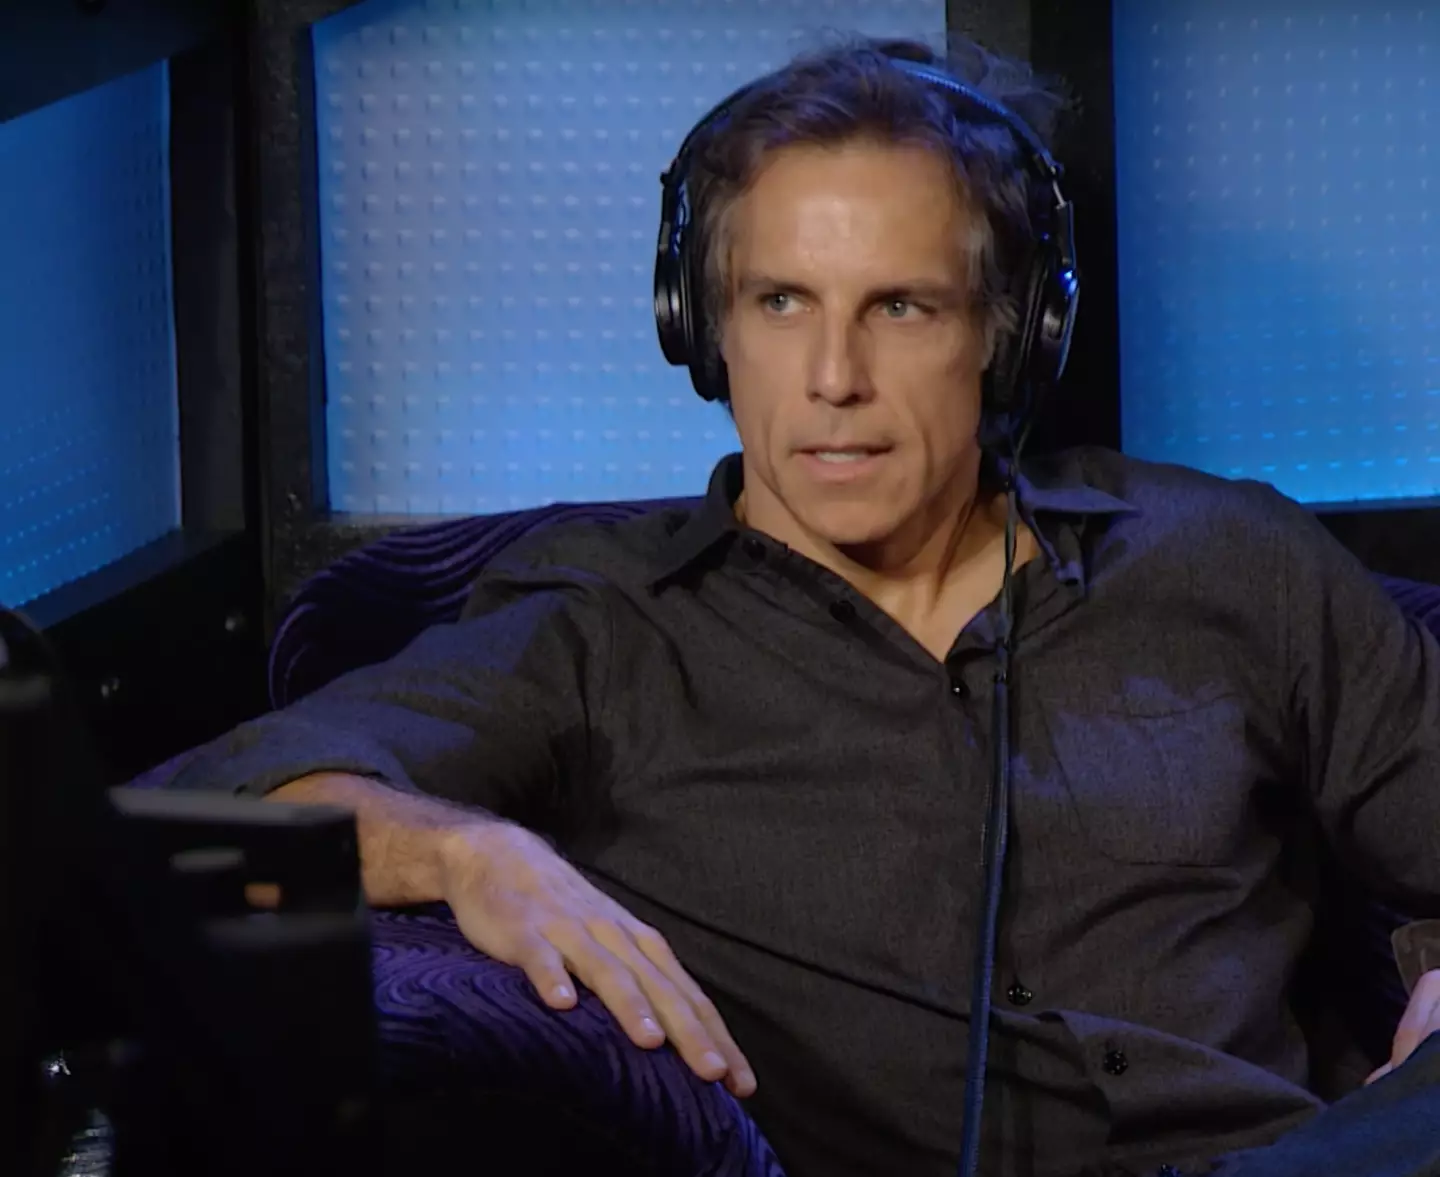 Ben Stiller opened up about his diagnosis to raise awareness.